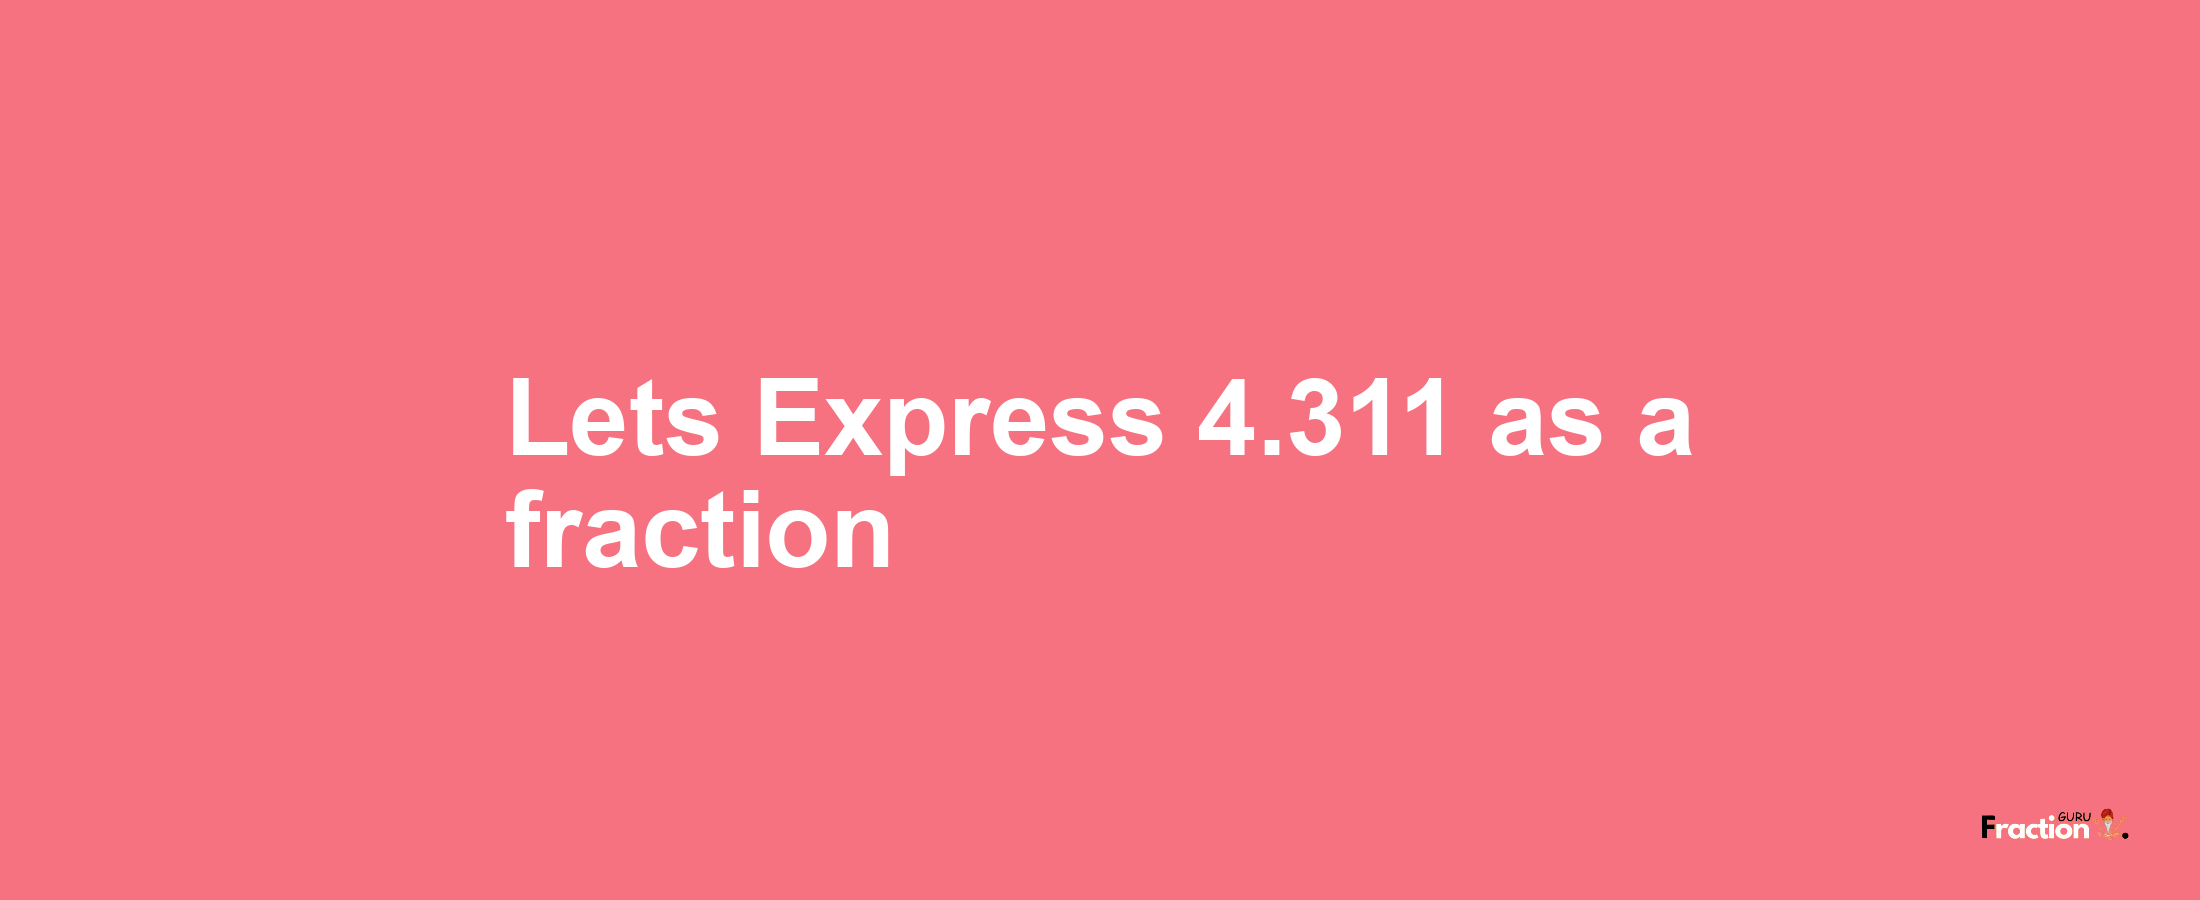 Lets Express 4.311 as afraction